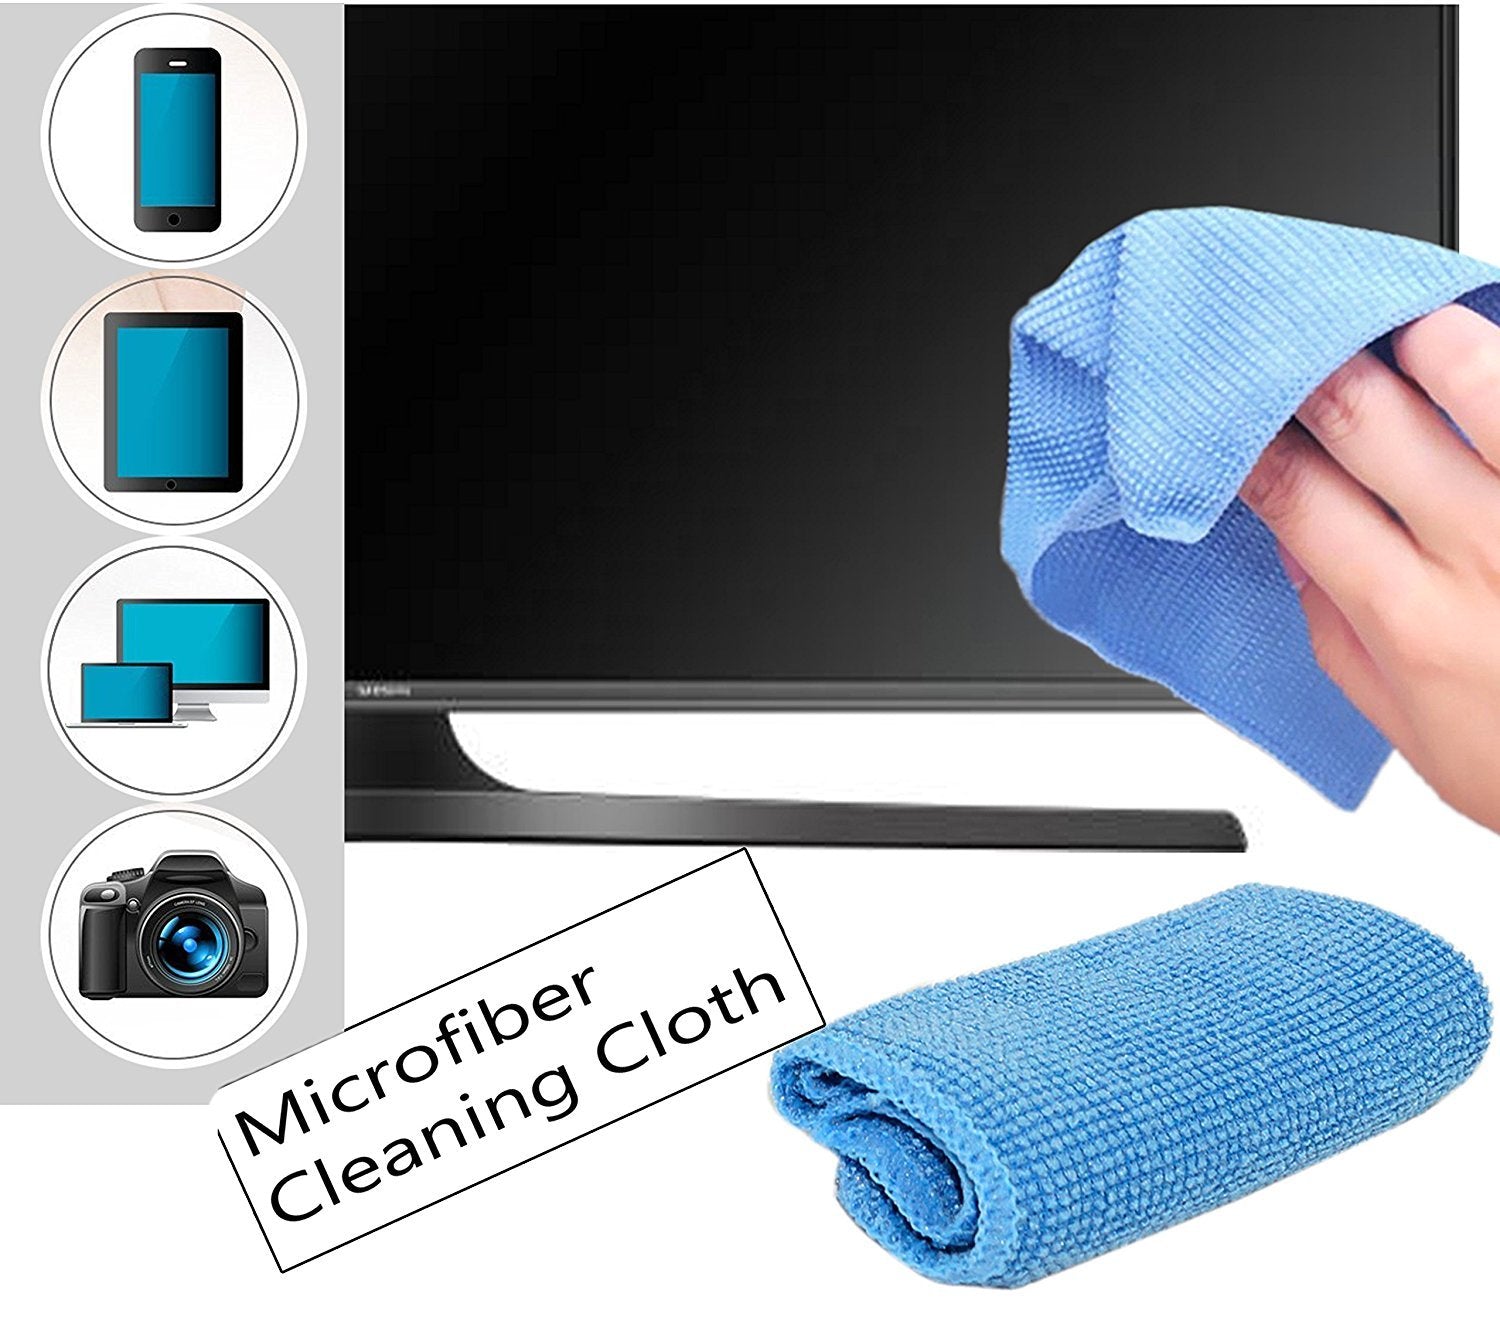 5 in 1 Cleaning Kit for DSLR Cameras & Professional Sensitive Electronics with Cleaning Air Blower etc.